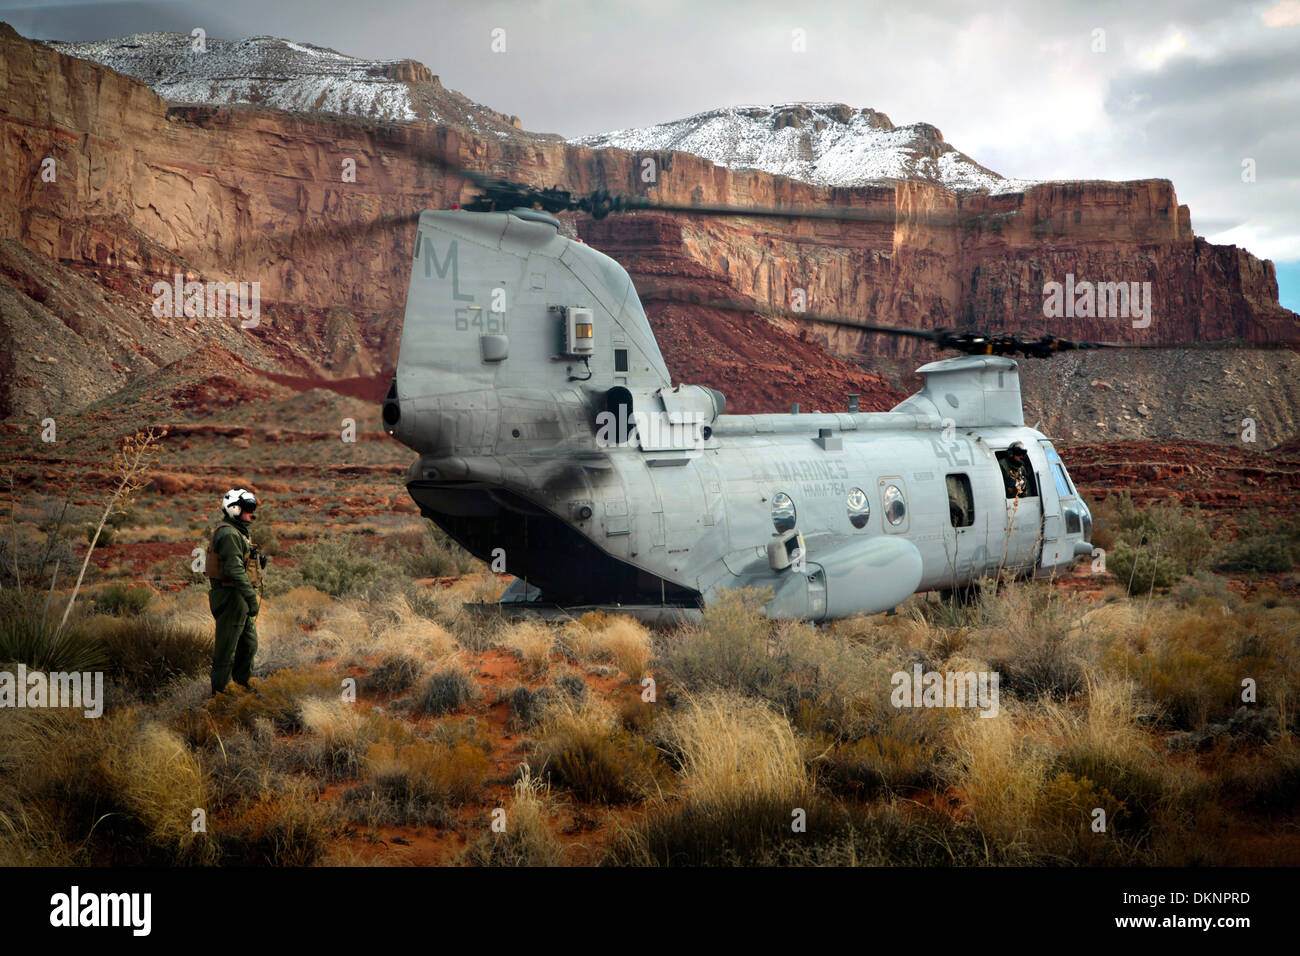 A US Marine Corps CH-46E Chinook helicopter sits in the bottom of the Grand Canyon during Toys For Tots Operation Havasupai delivering Santa Claus and toys to children of the Havasupai Indian tribe December 14, 2011 in Supai, AZ. Stock Photo